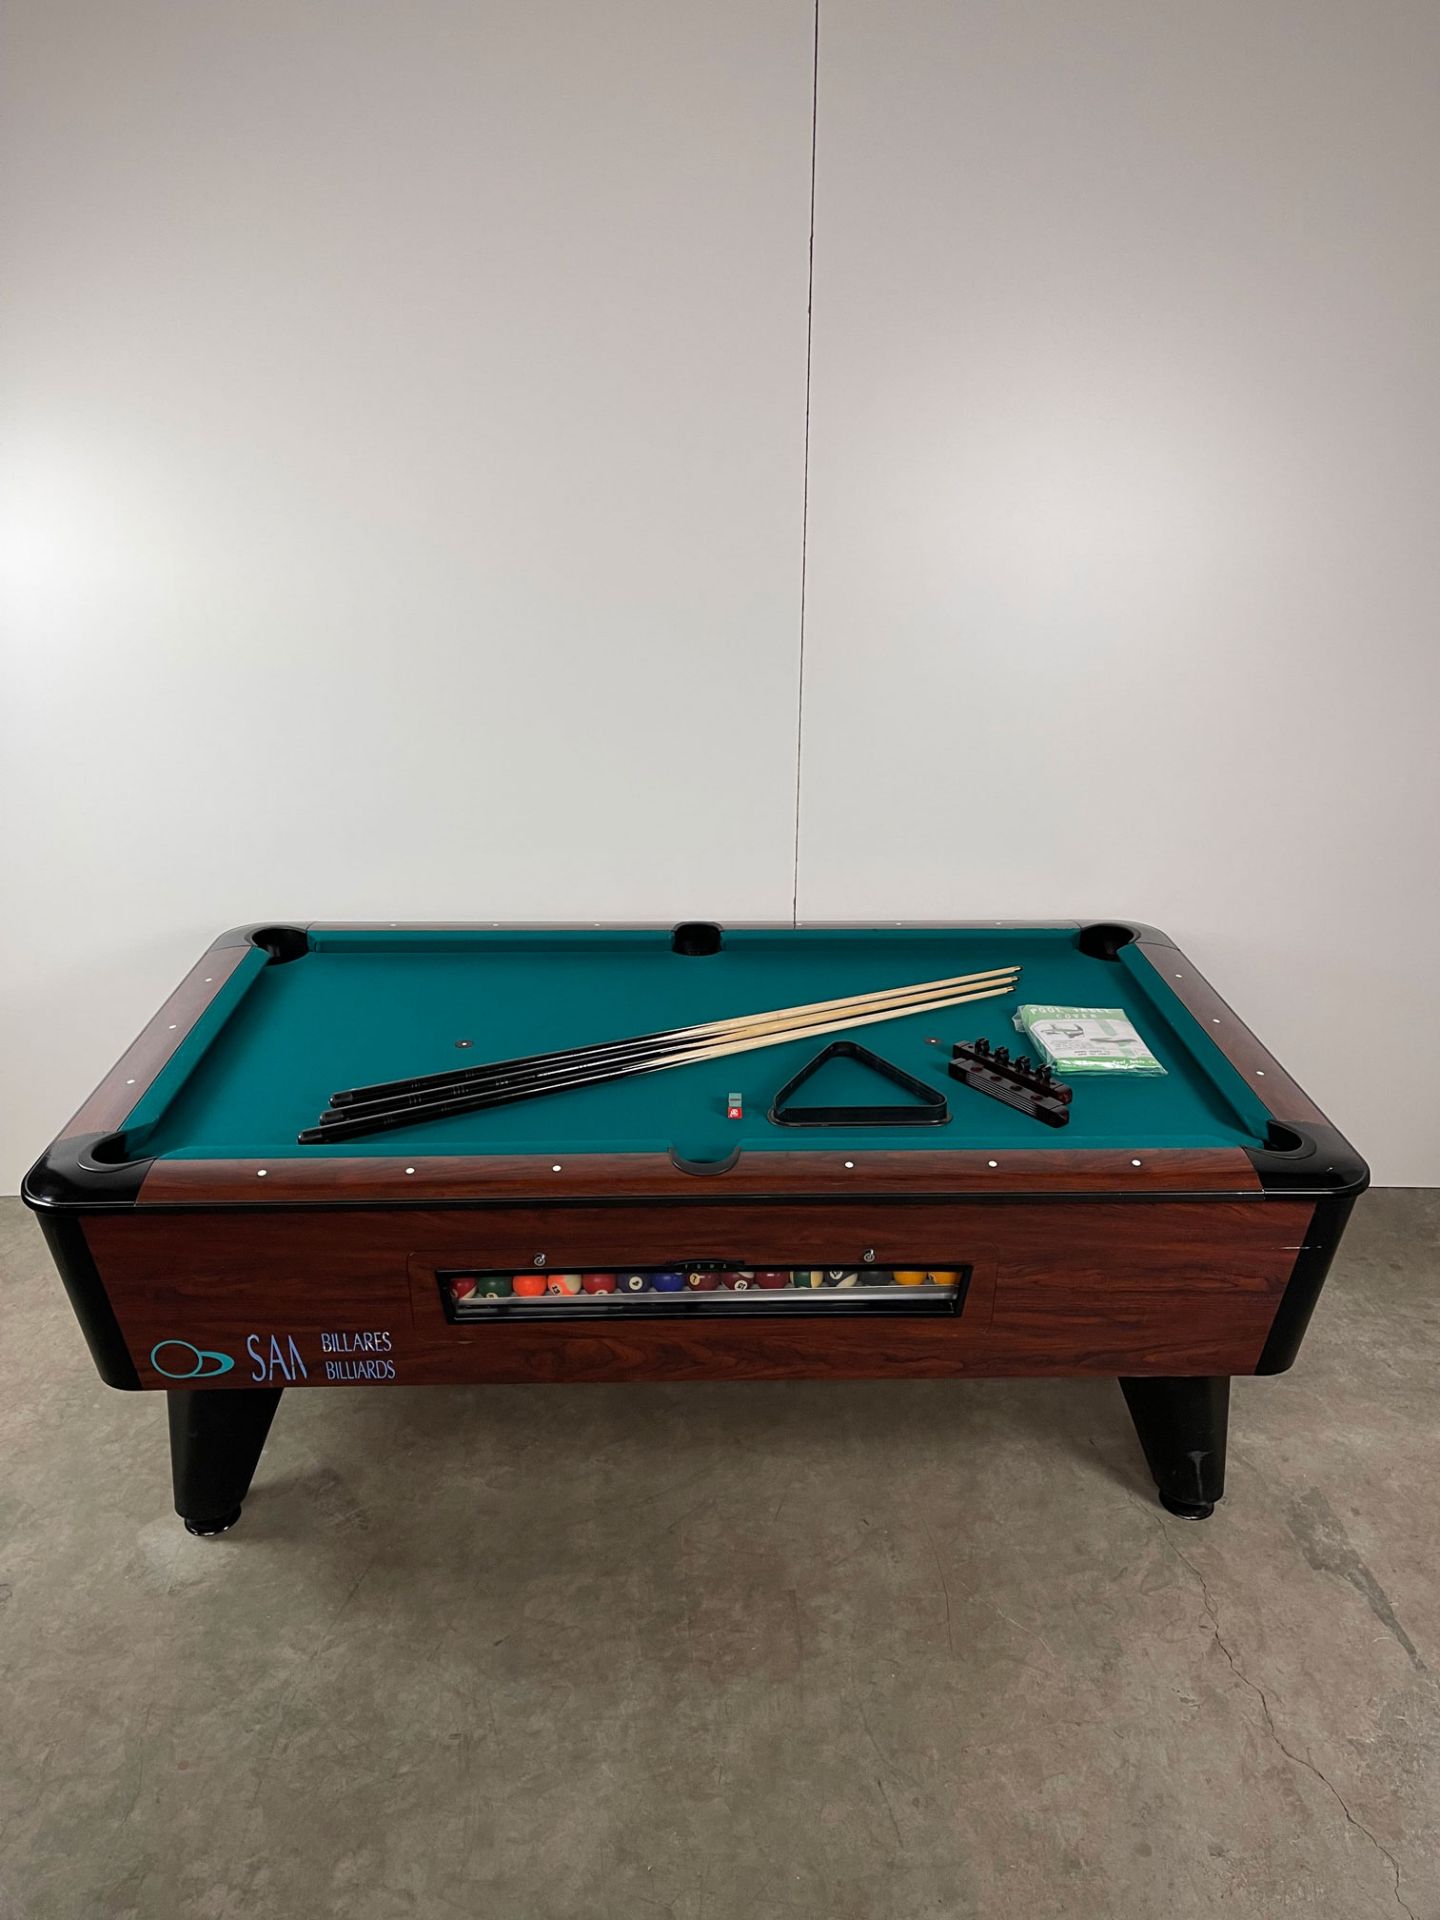 7ft SAM YOWA Coin-Op Billiards Table - Image 4 of 16